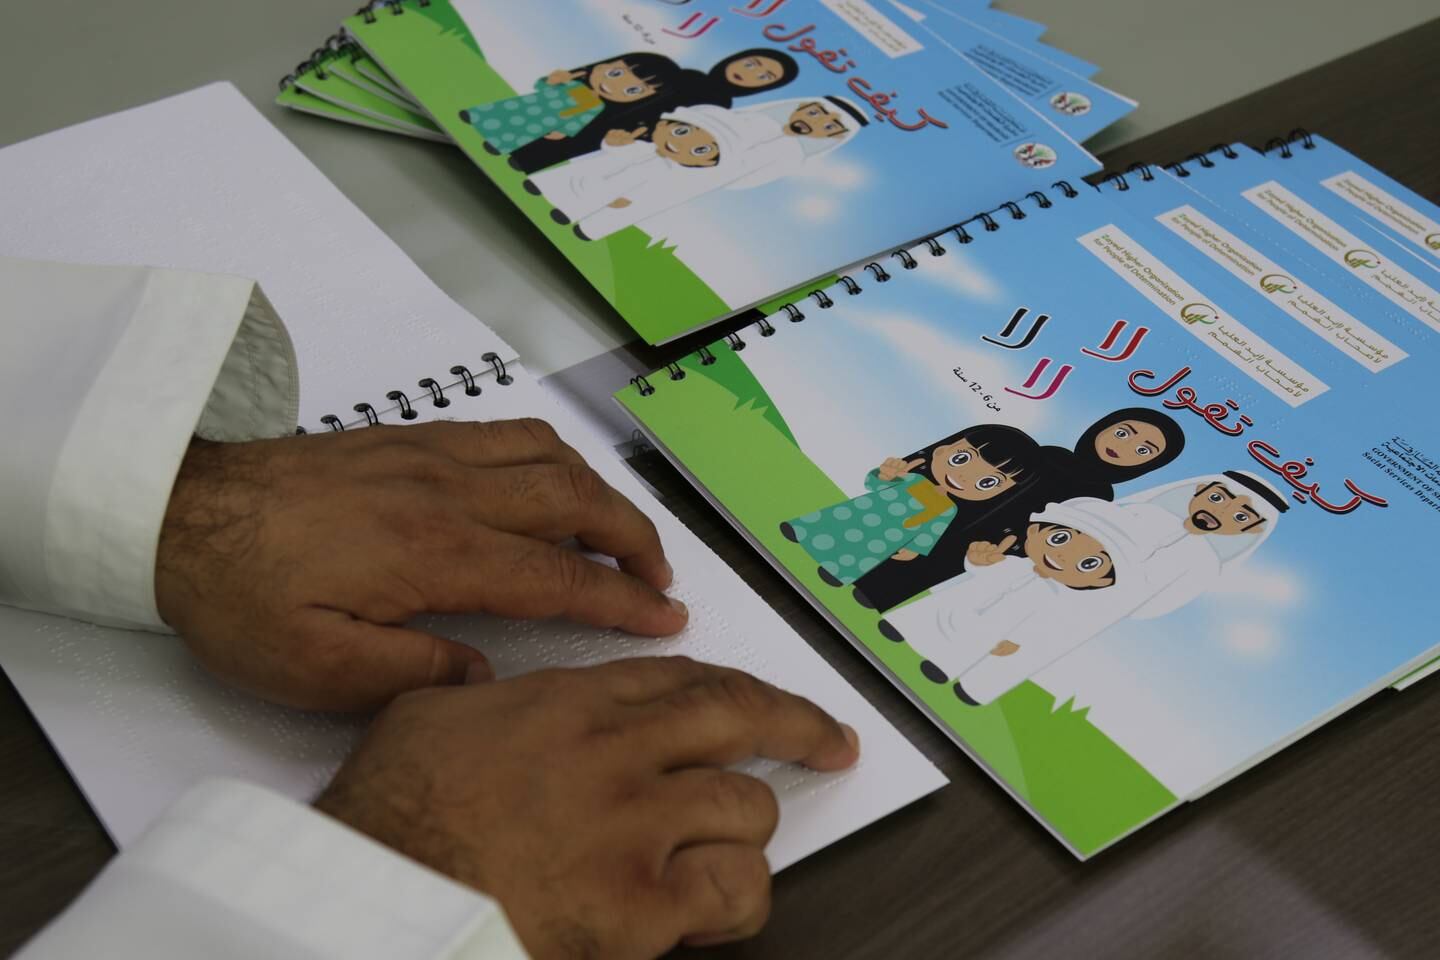 Programmes from Sharjah Child and Family Protection Centre teach children about their rights. Photo: Sharjah Child and Family Protection Centre